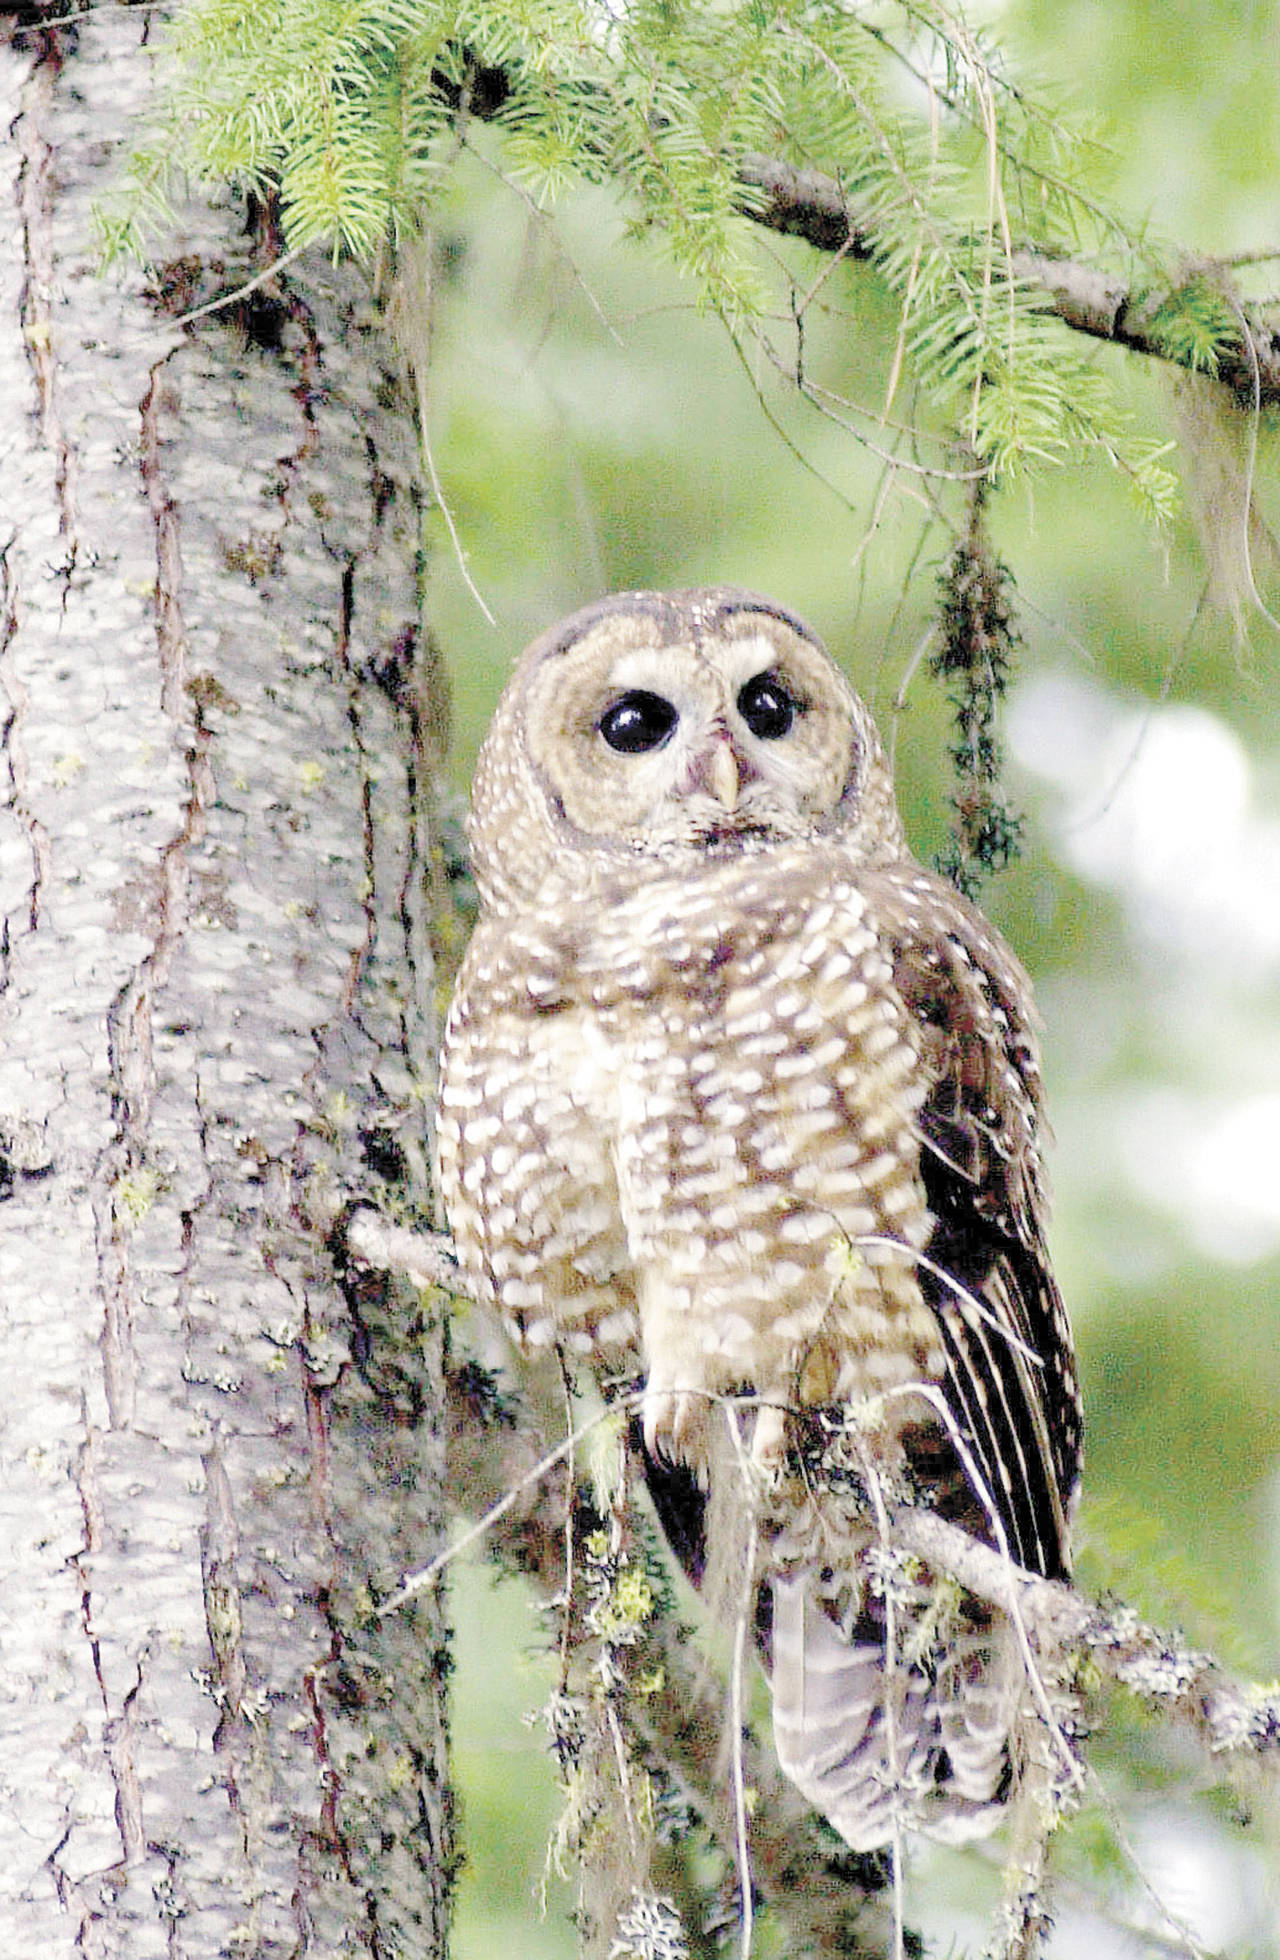 FILE — In this May 8, 2003 file photo, a northern spotted owl sits on a tree in the Deschutes National Forest near Camp Sherman, Ore.